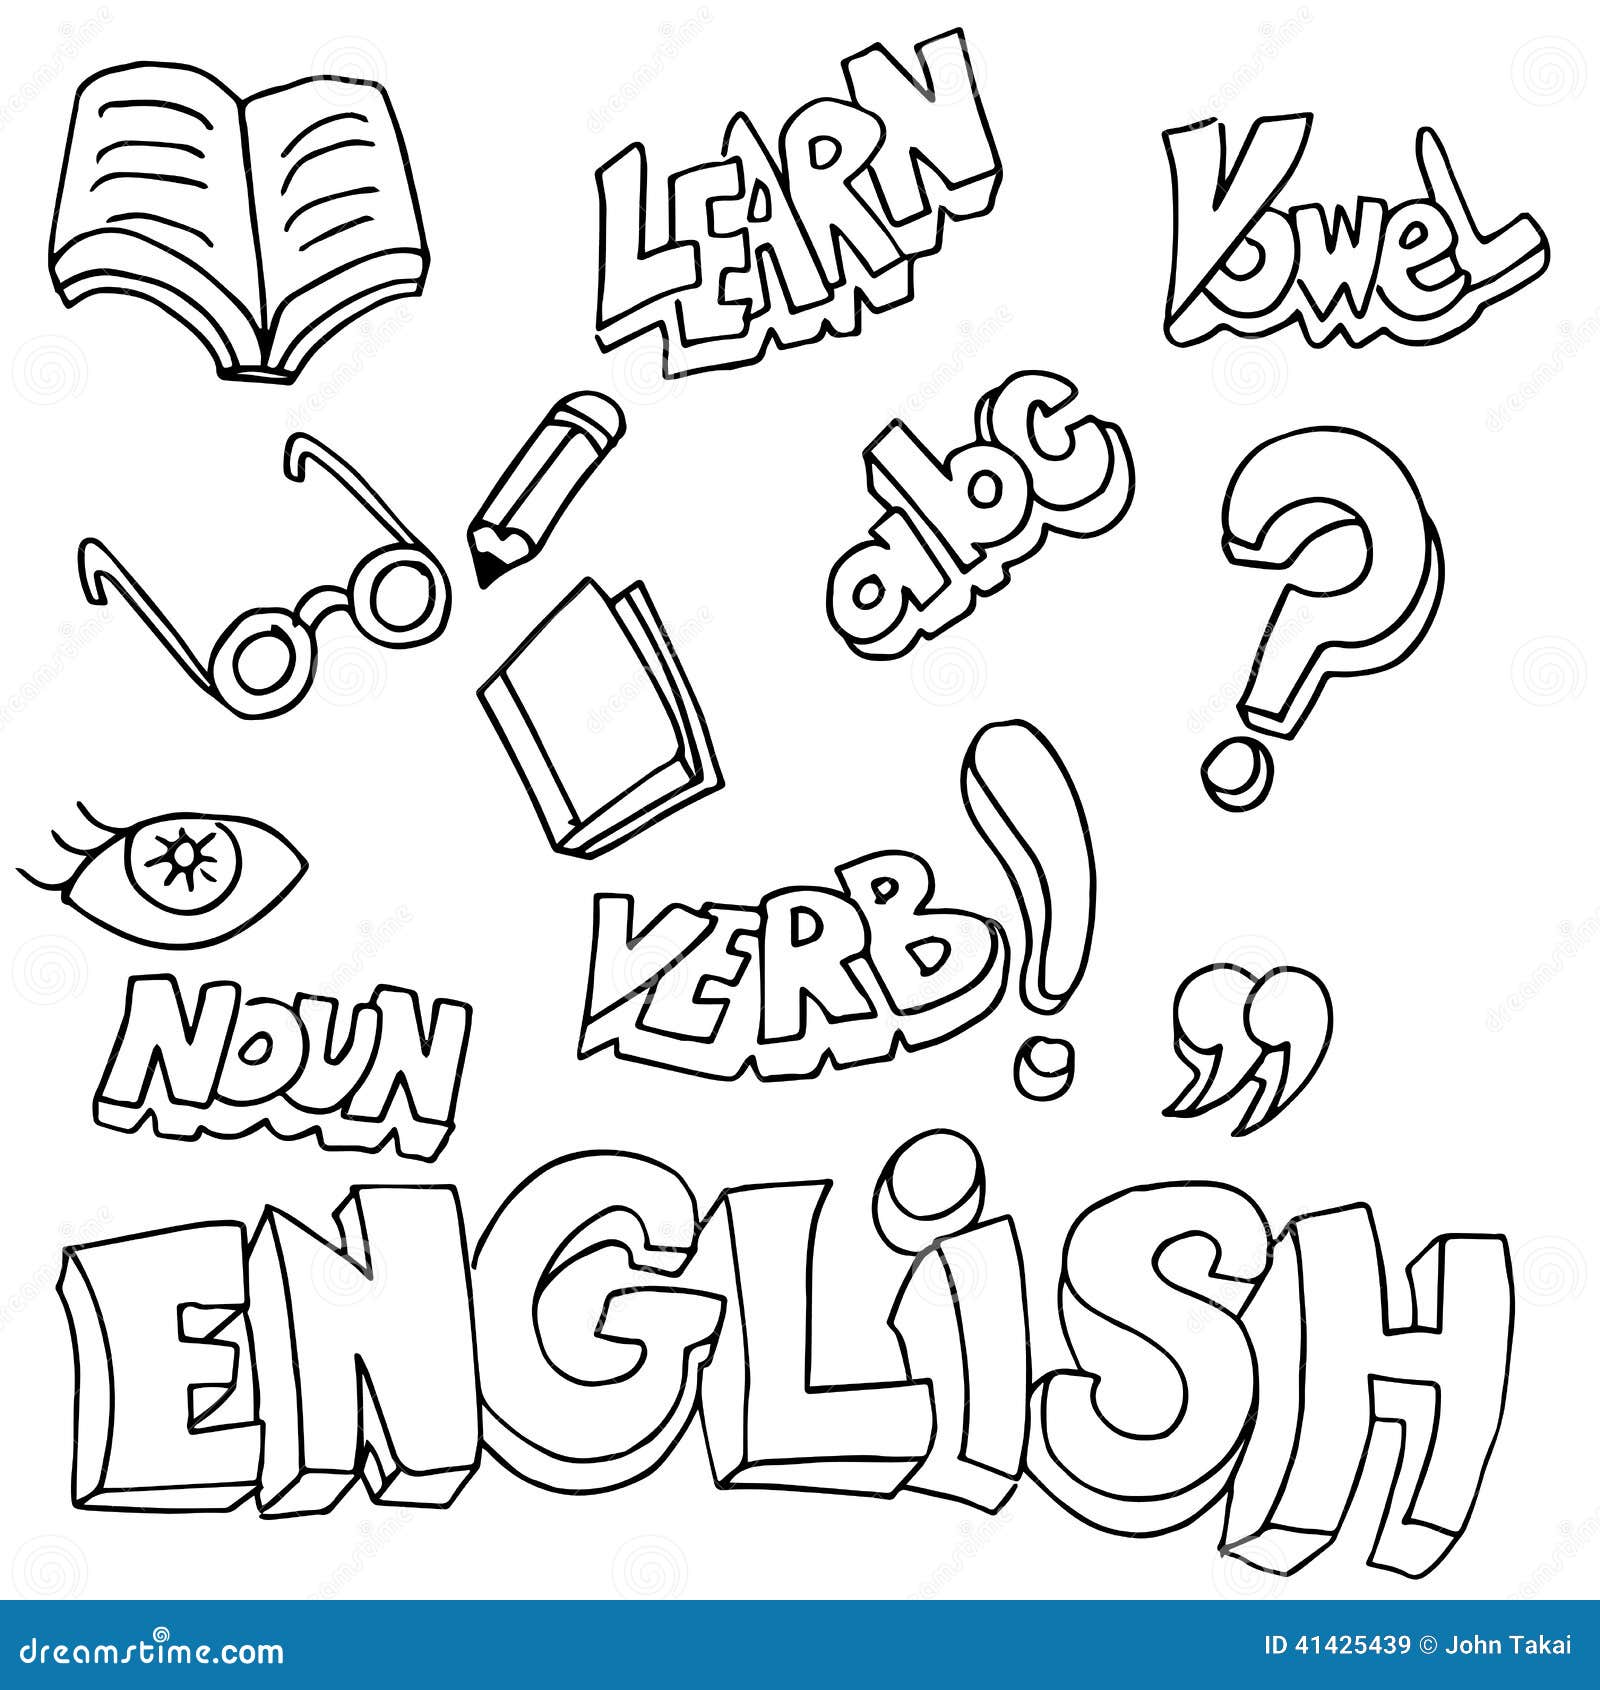 English Symbols And Learning Items Stock Vector - Image: 41425439